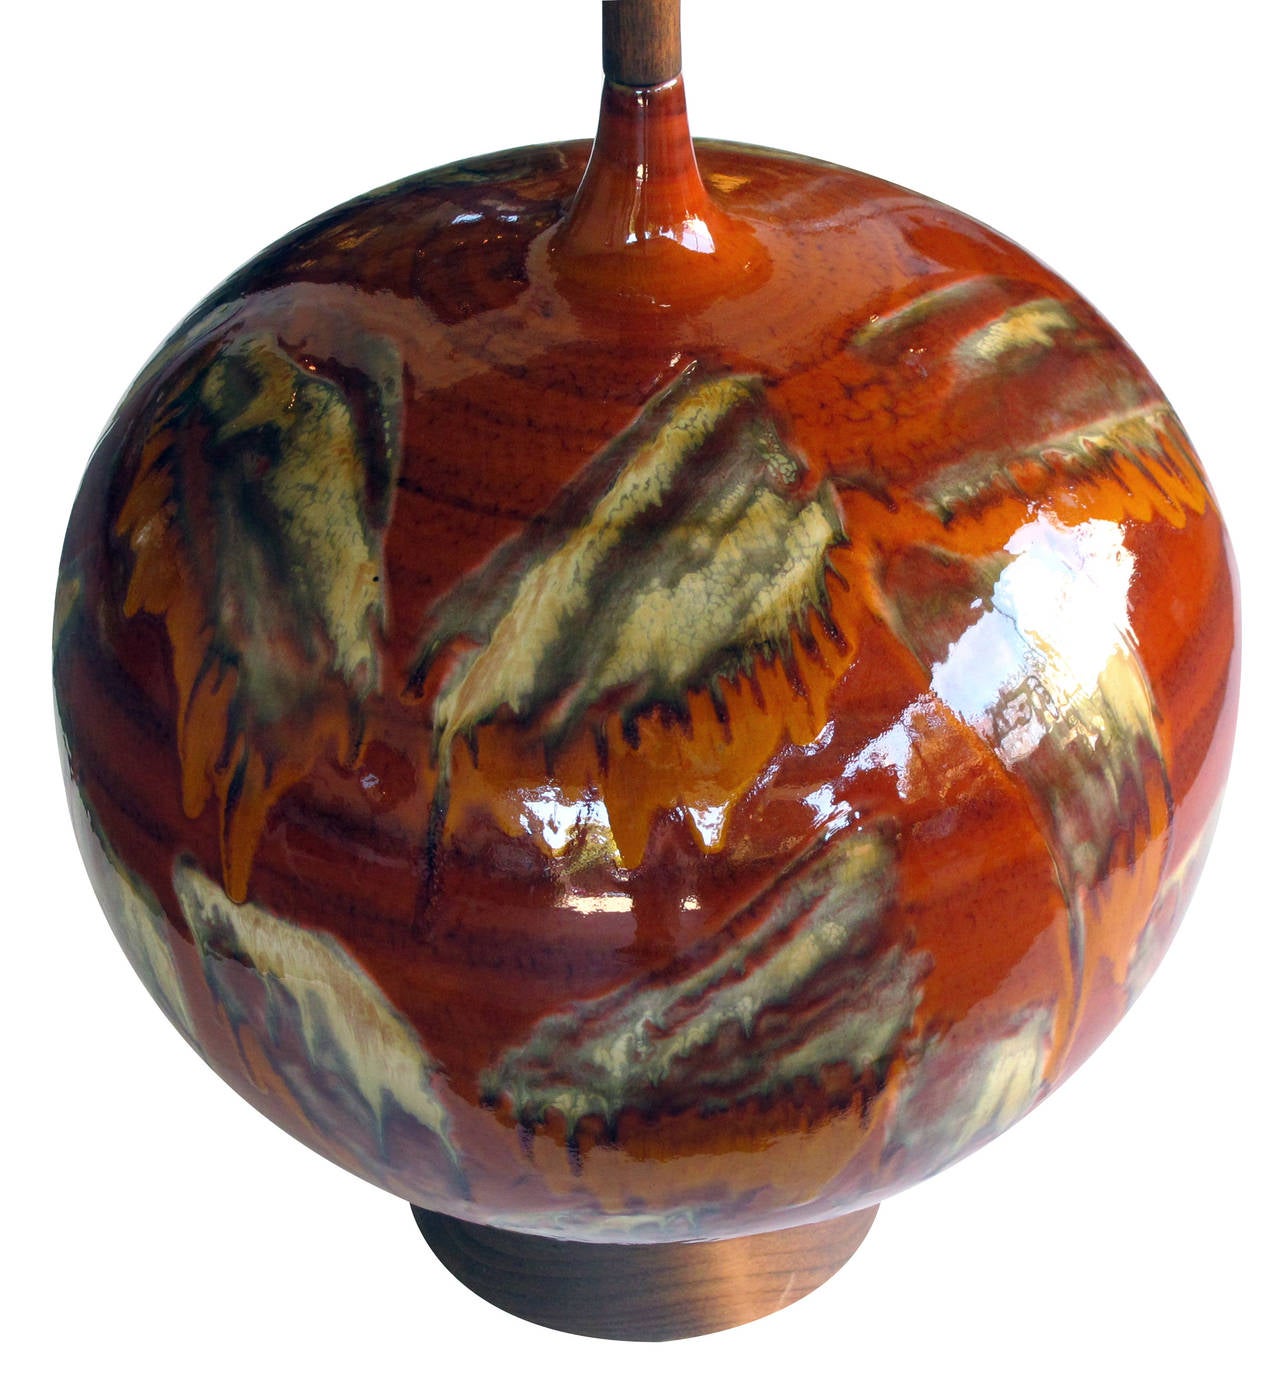 An impressively large Danish 1960s burnt orange and brown drip-glaze ceramic orb-form lamp; the large lamp with abstract drip glaze in rich earth tones; resting on a walnut base.